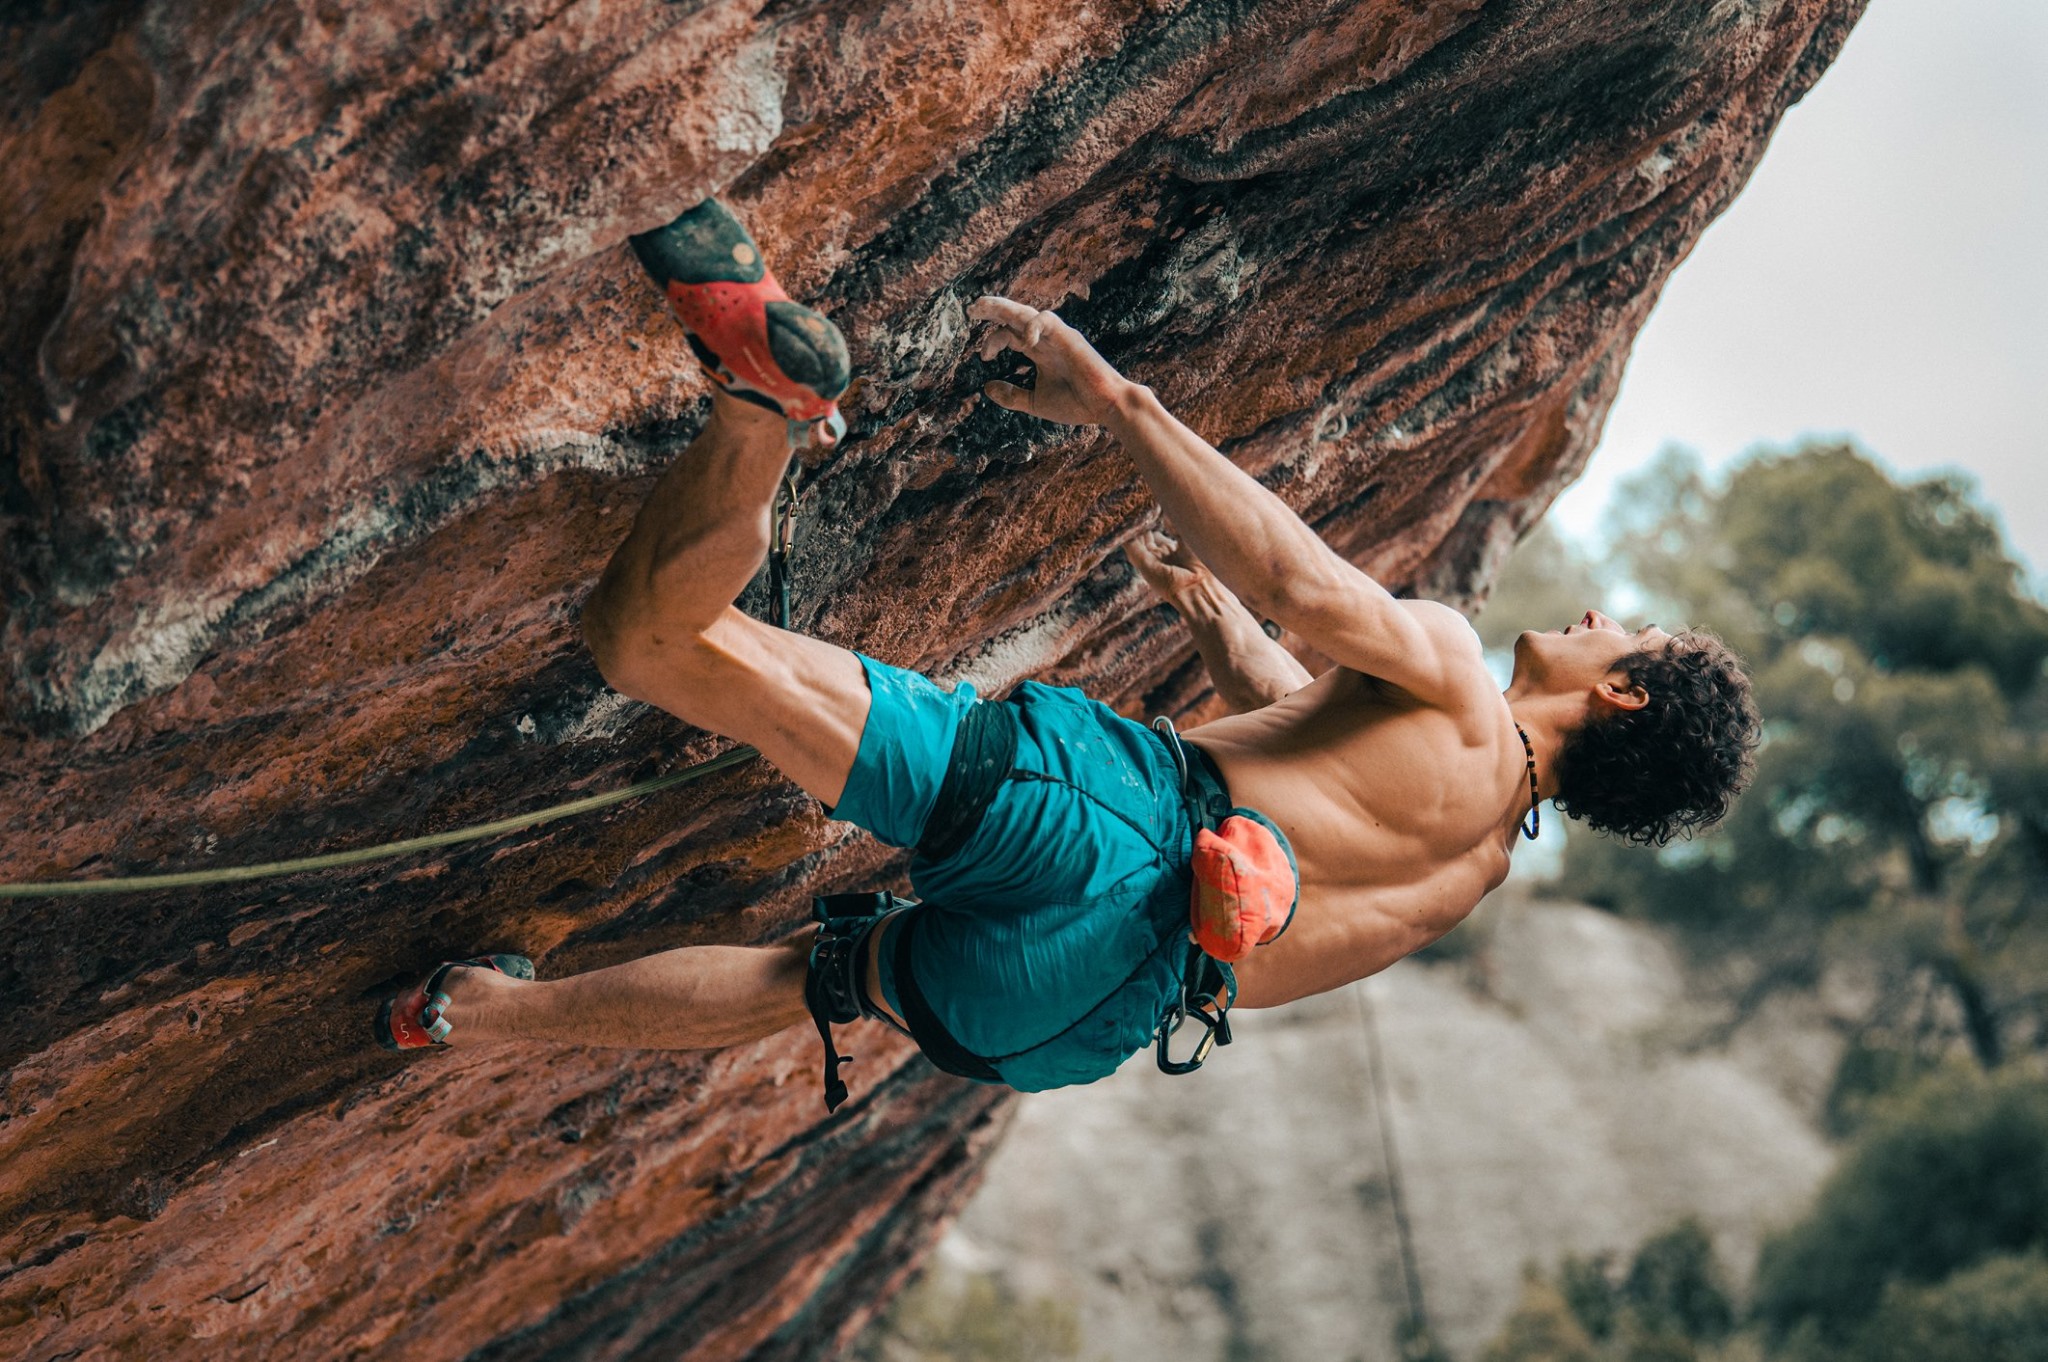 Adam Ondra Attempting Potential 5 15d In Spain Gripped Magazine